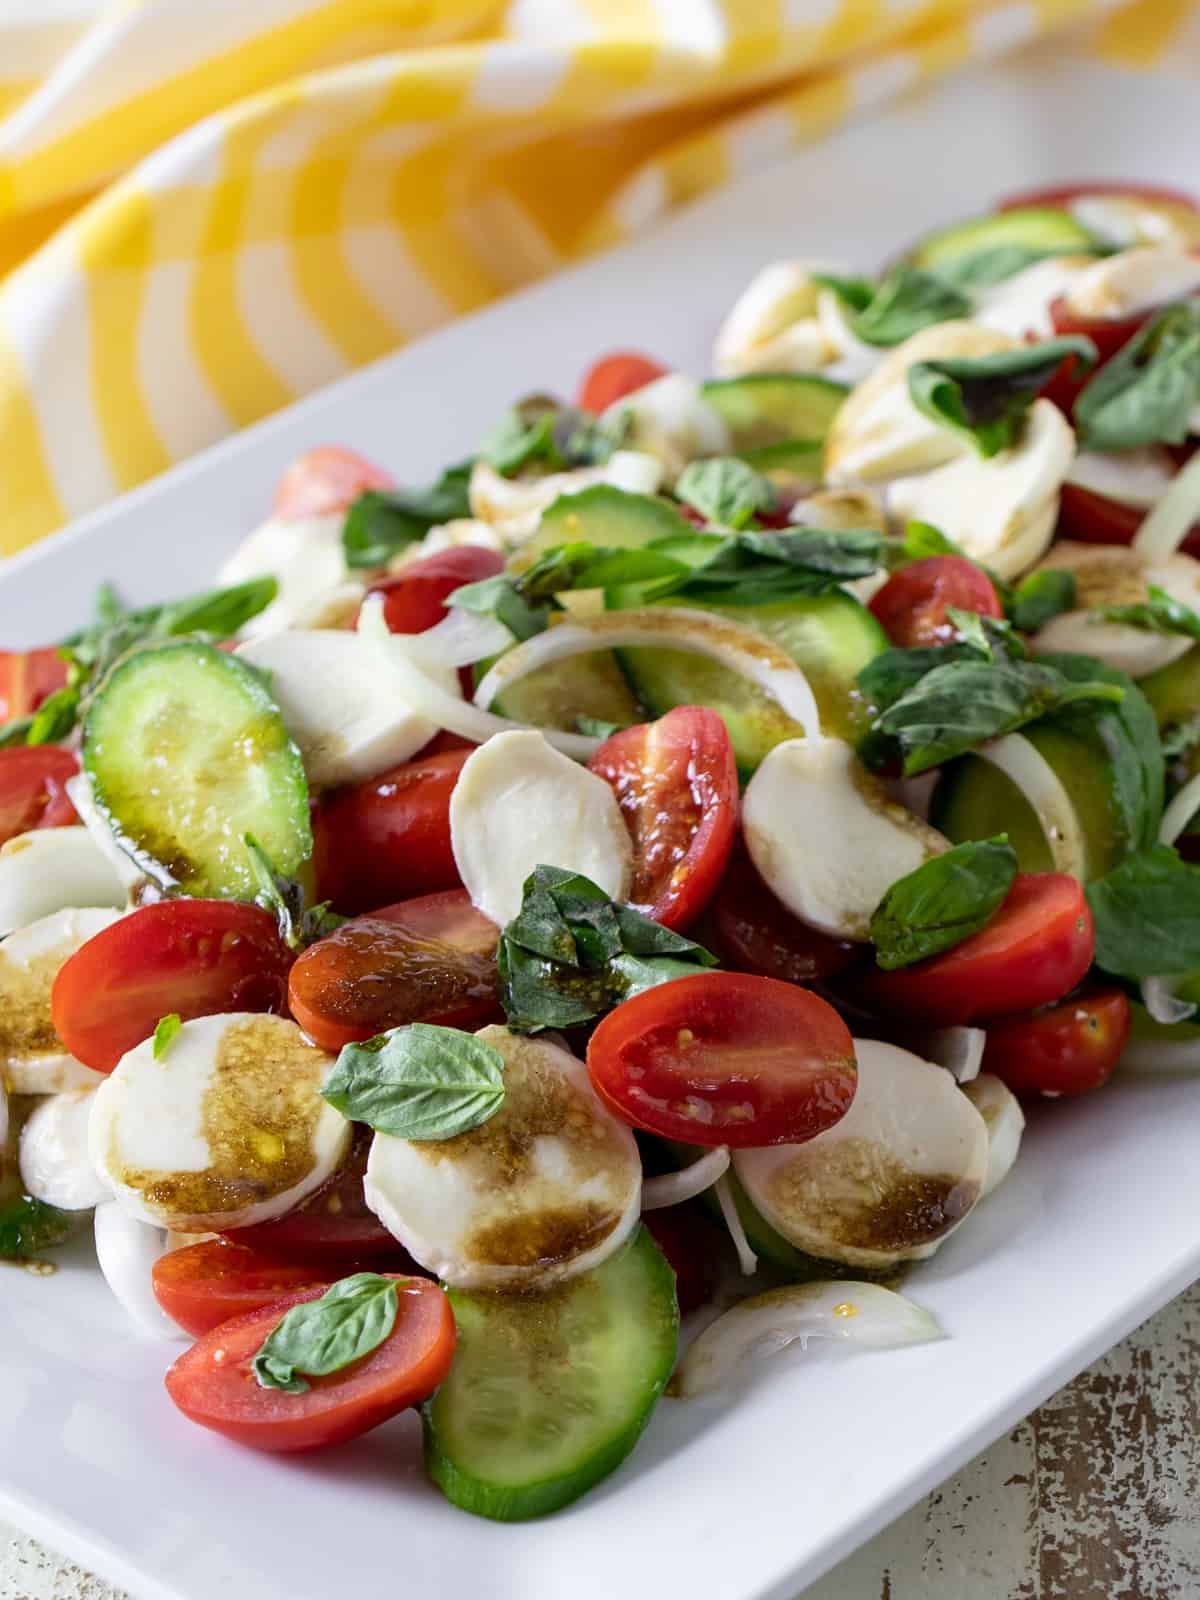 Grape tomatoes, cucumber, tomatoes and fresh mozzarella cheese served in a salad.